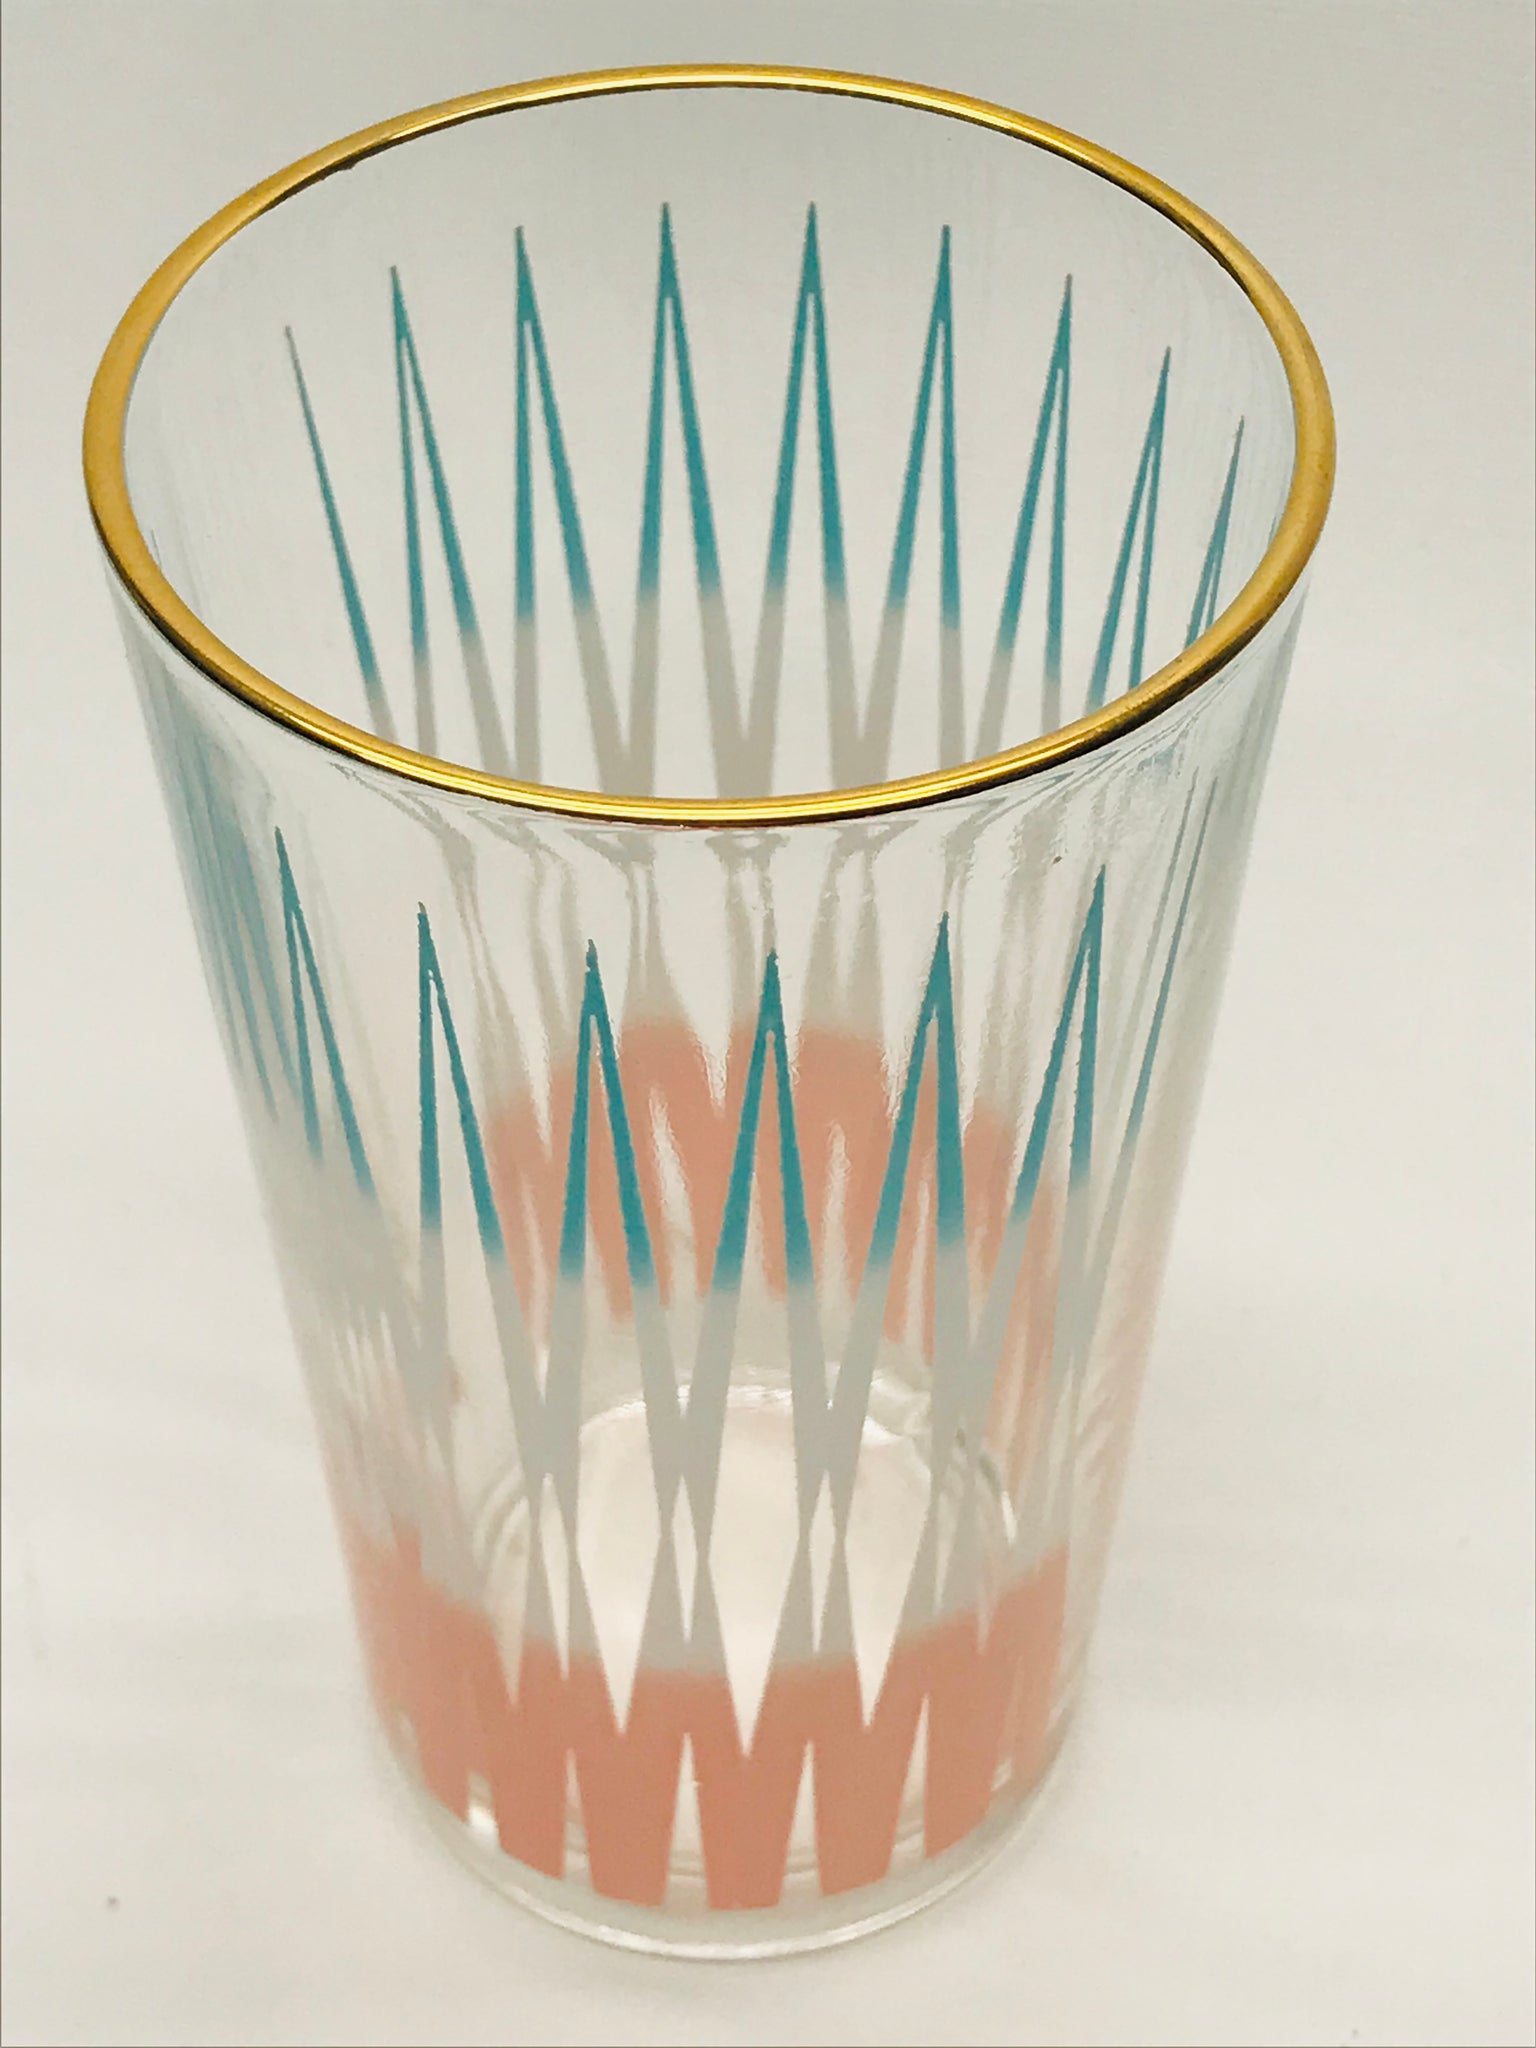 One Pink, White & Blue Vintage Glass